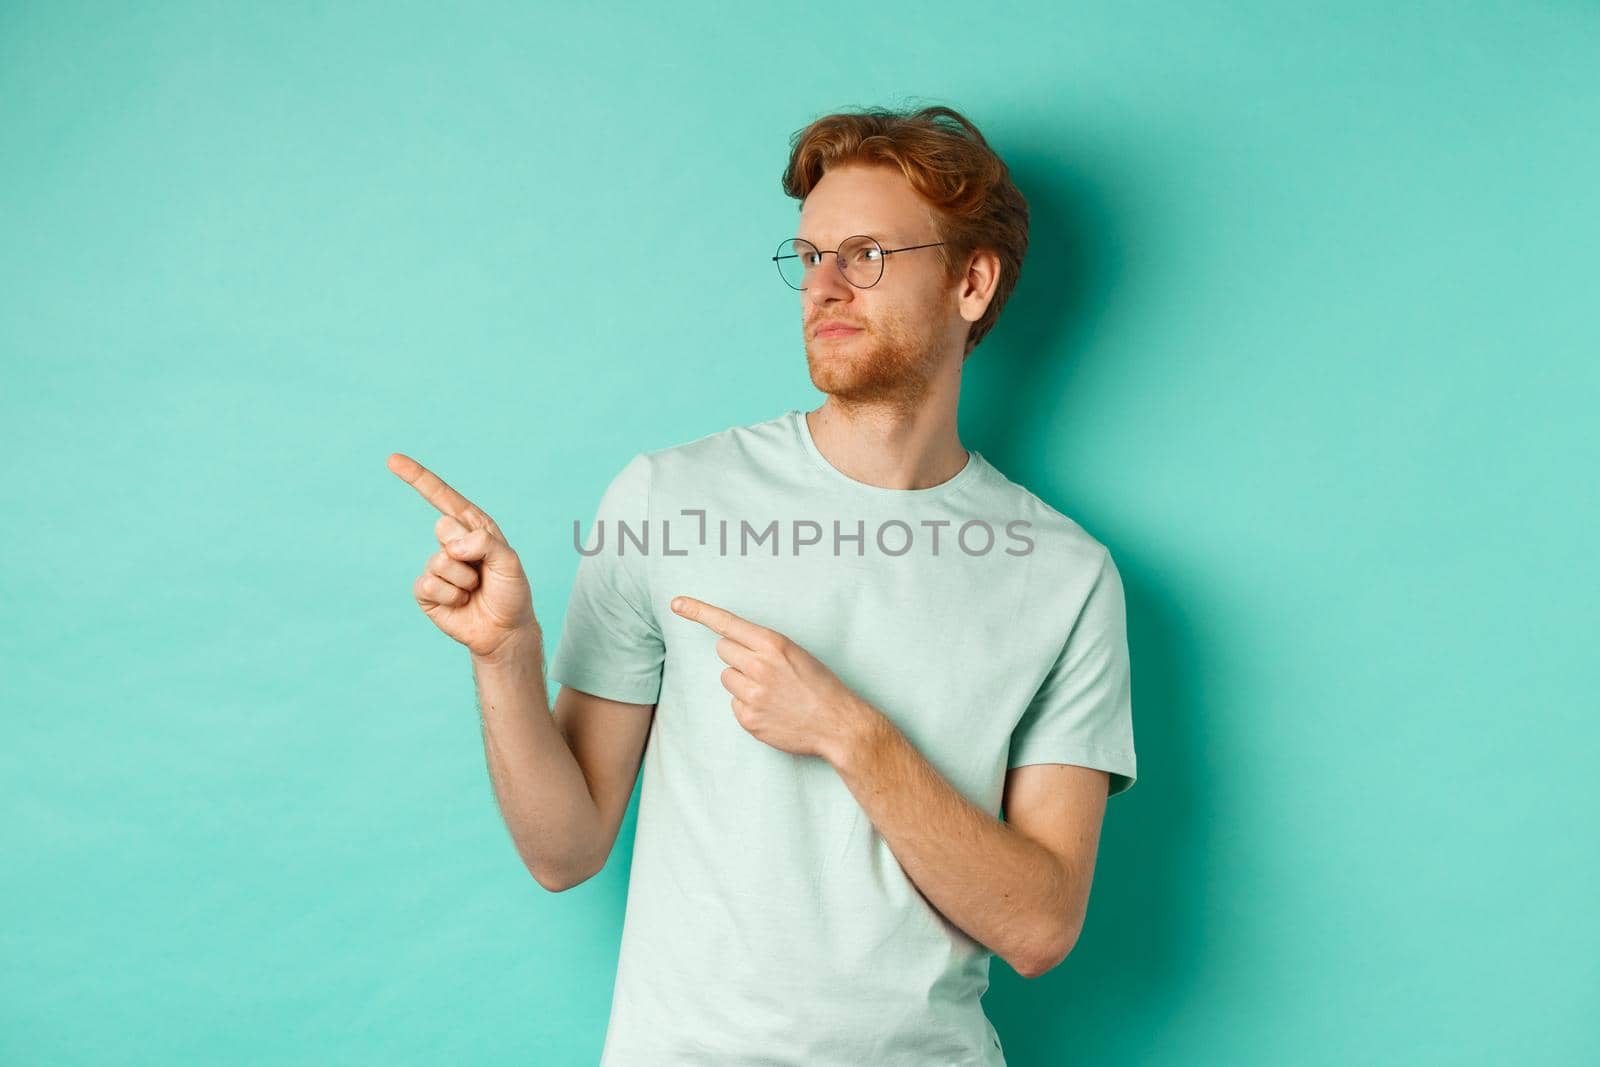 Skeptical caucasian guy with red hair and beard, wearing glasses and t-shirt, looking and pointing left disappointed, judging something bad, standing over mint background.